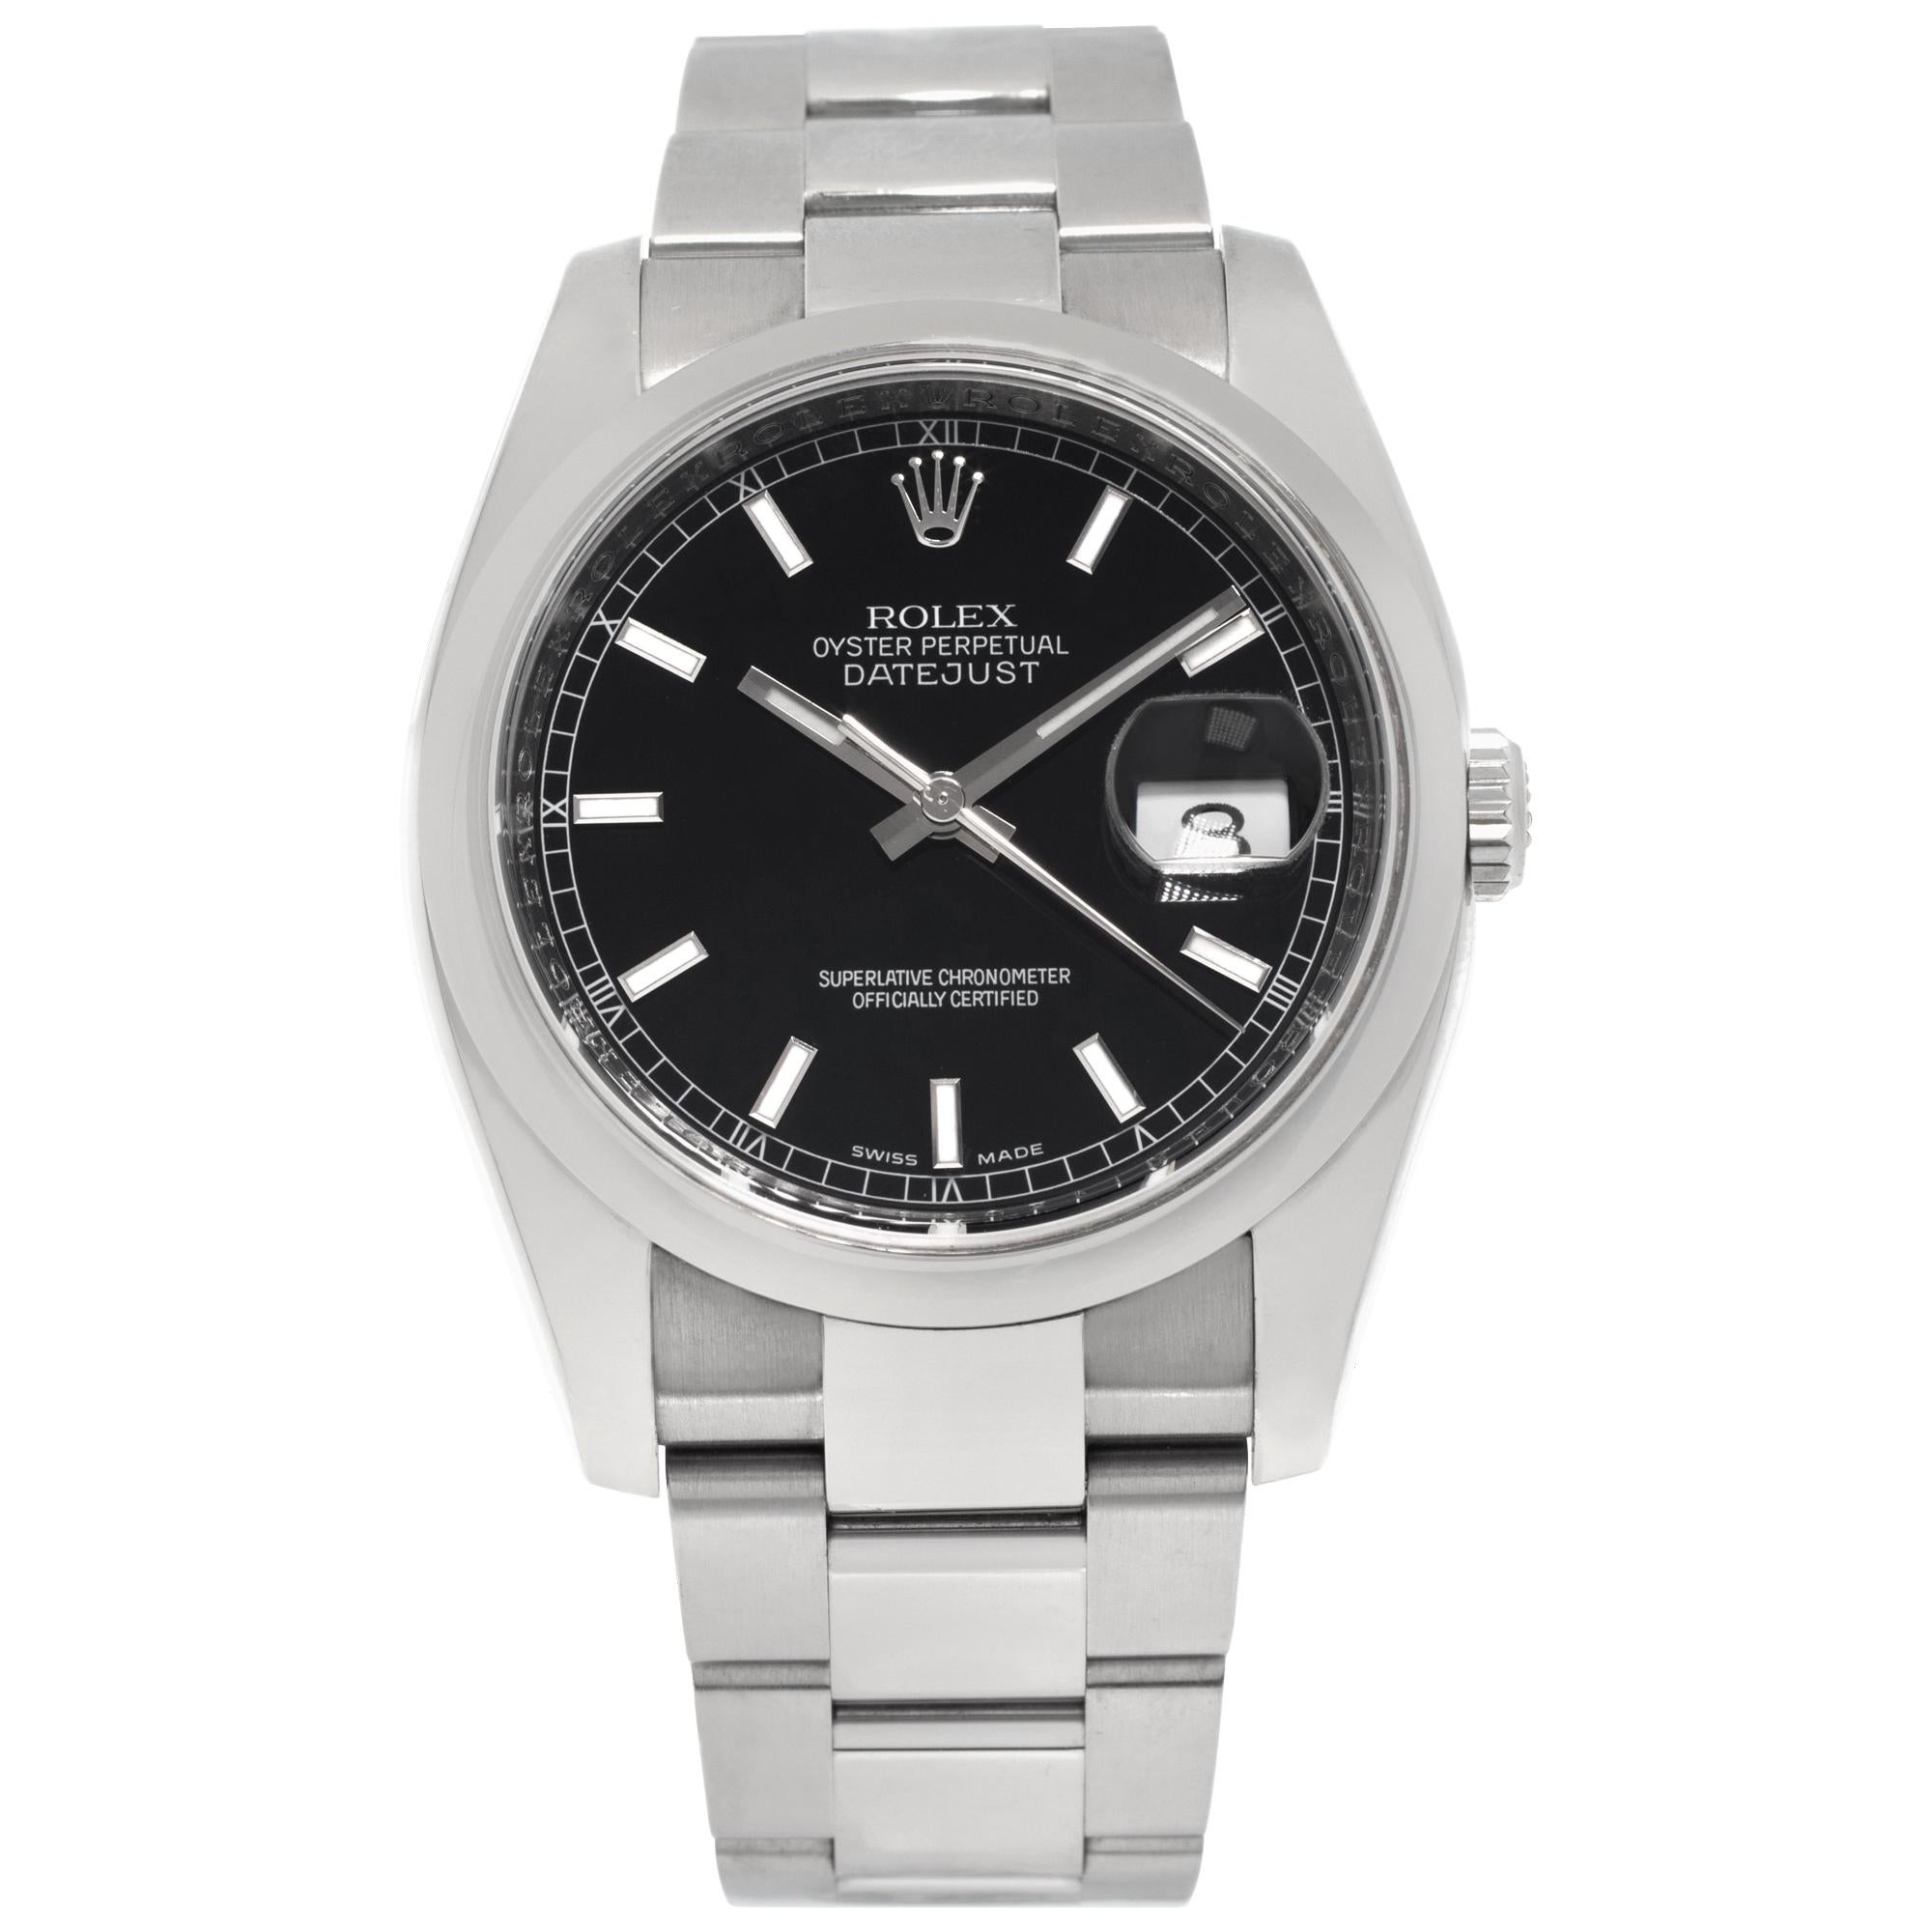 Rolex Datejust 116200 in Stainless Steel with a Black dial 36mm Automatic watch For Sale